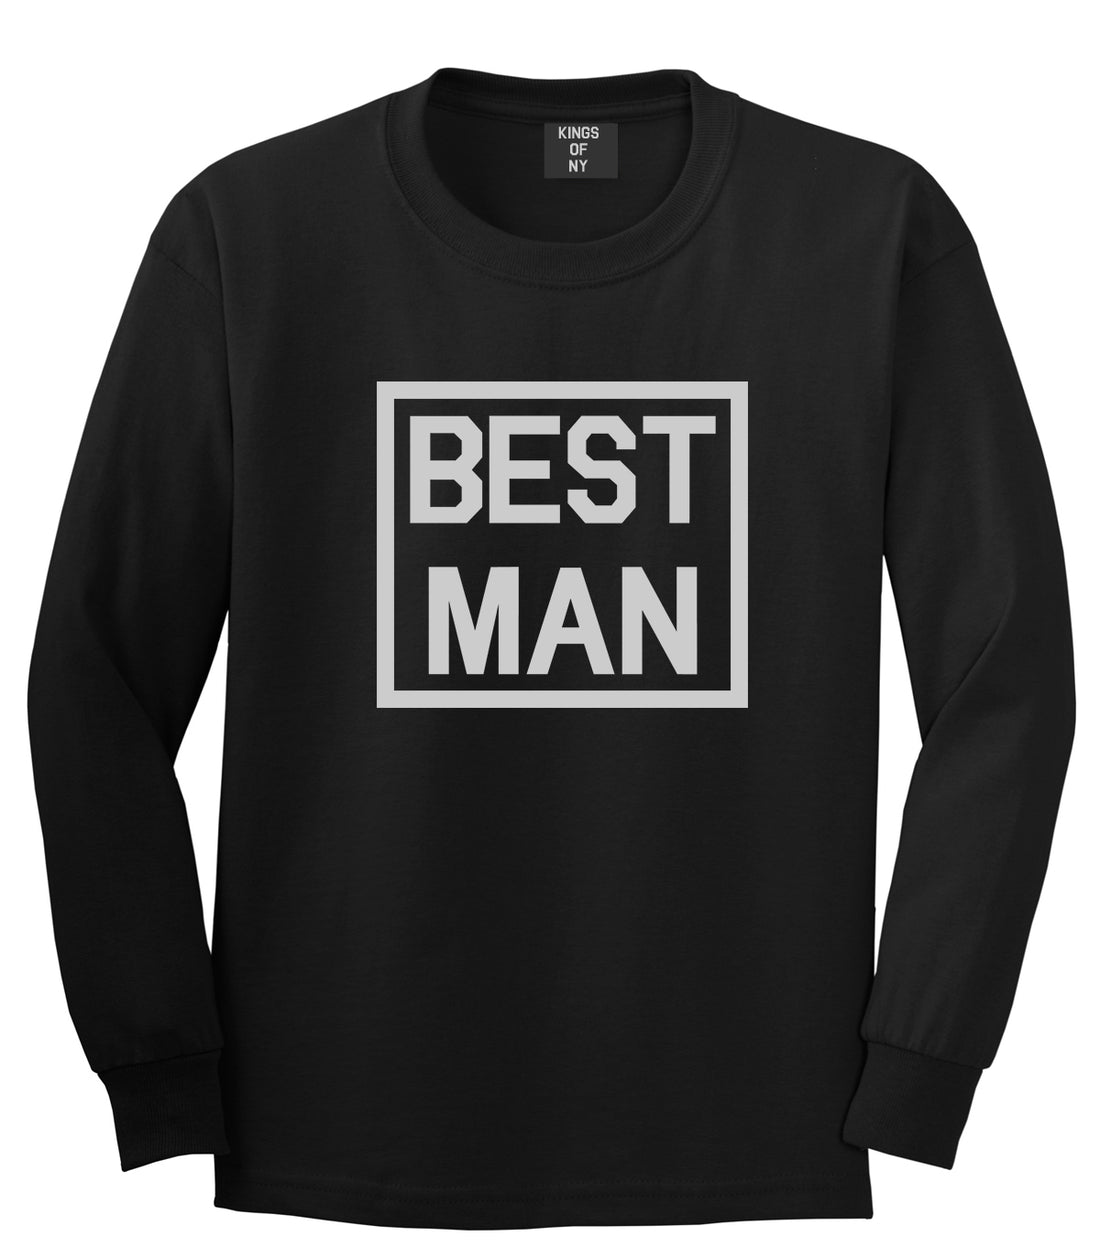 Best Man Bachelor Party Black Long Sleeve T-Shirt by Kings Of NY